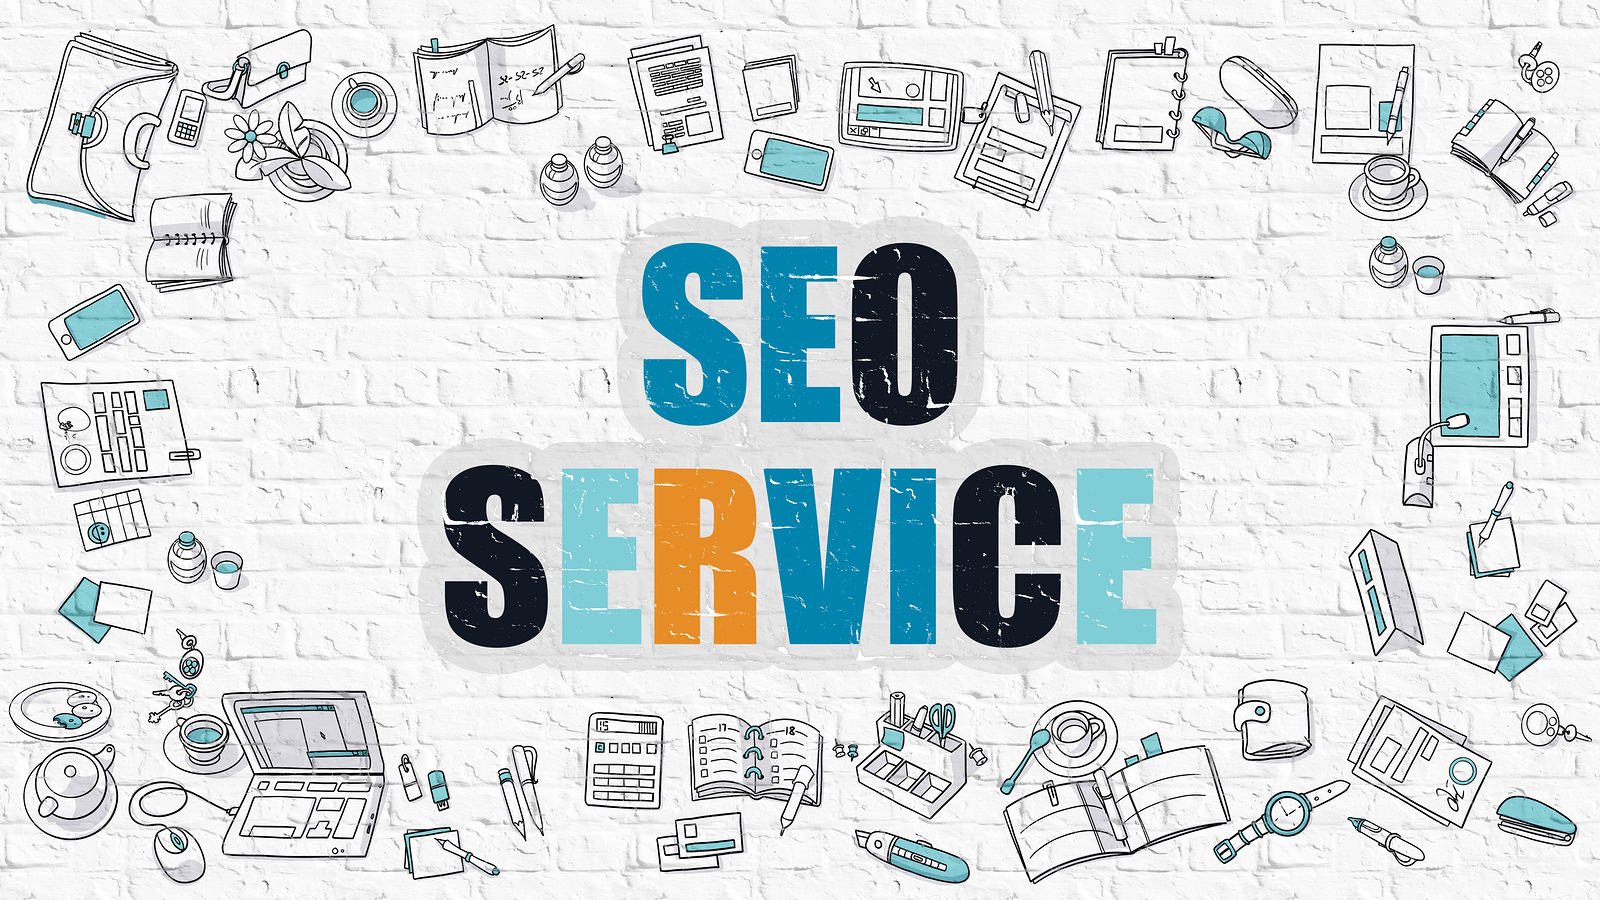 Enjoy more discernibility by contacting the best SEO services company